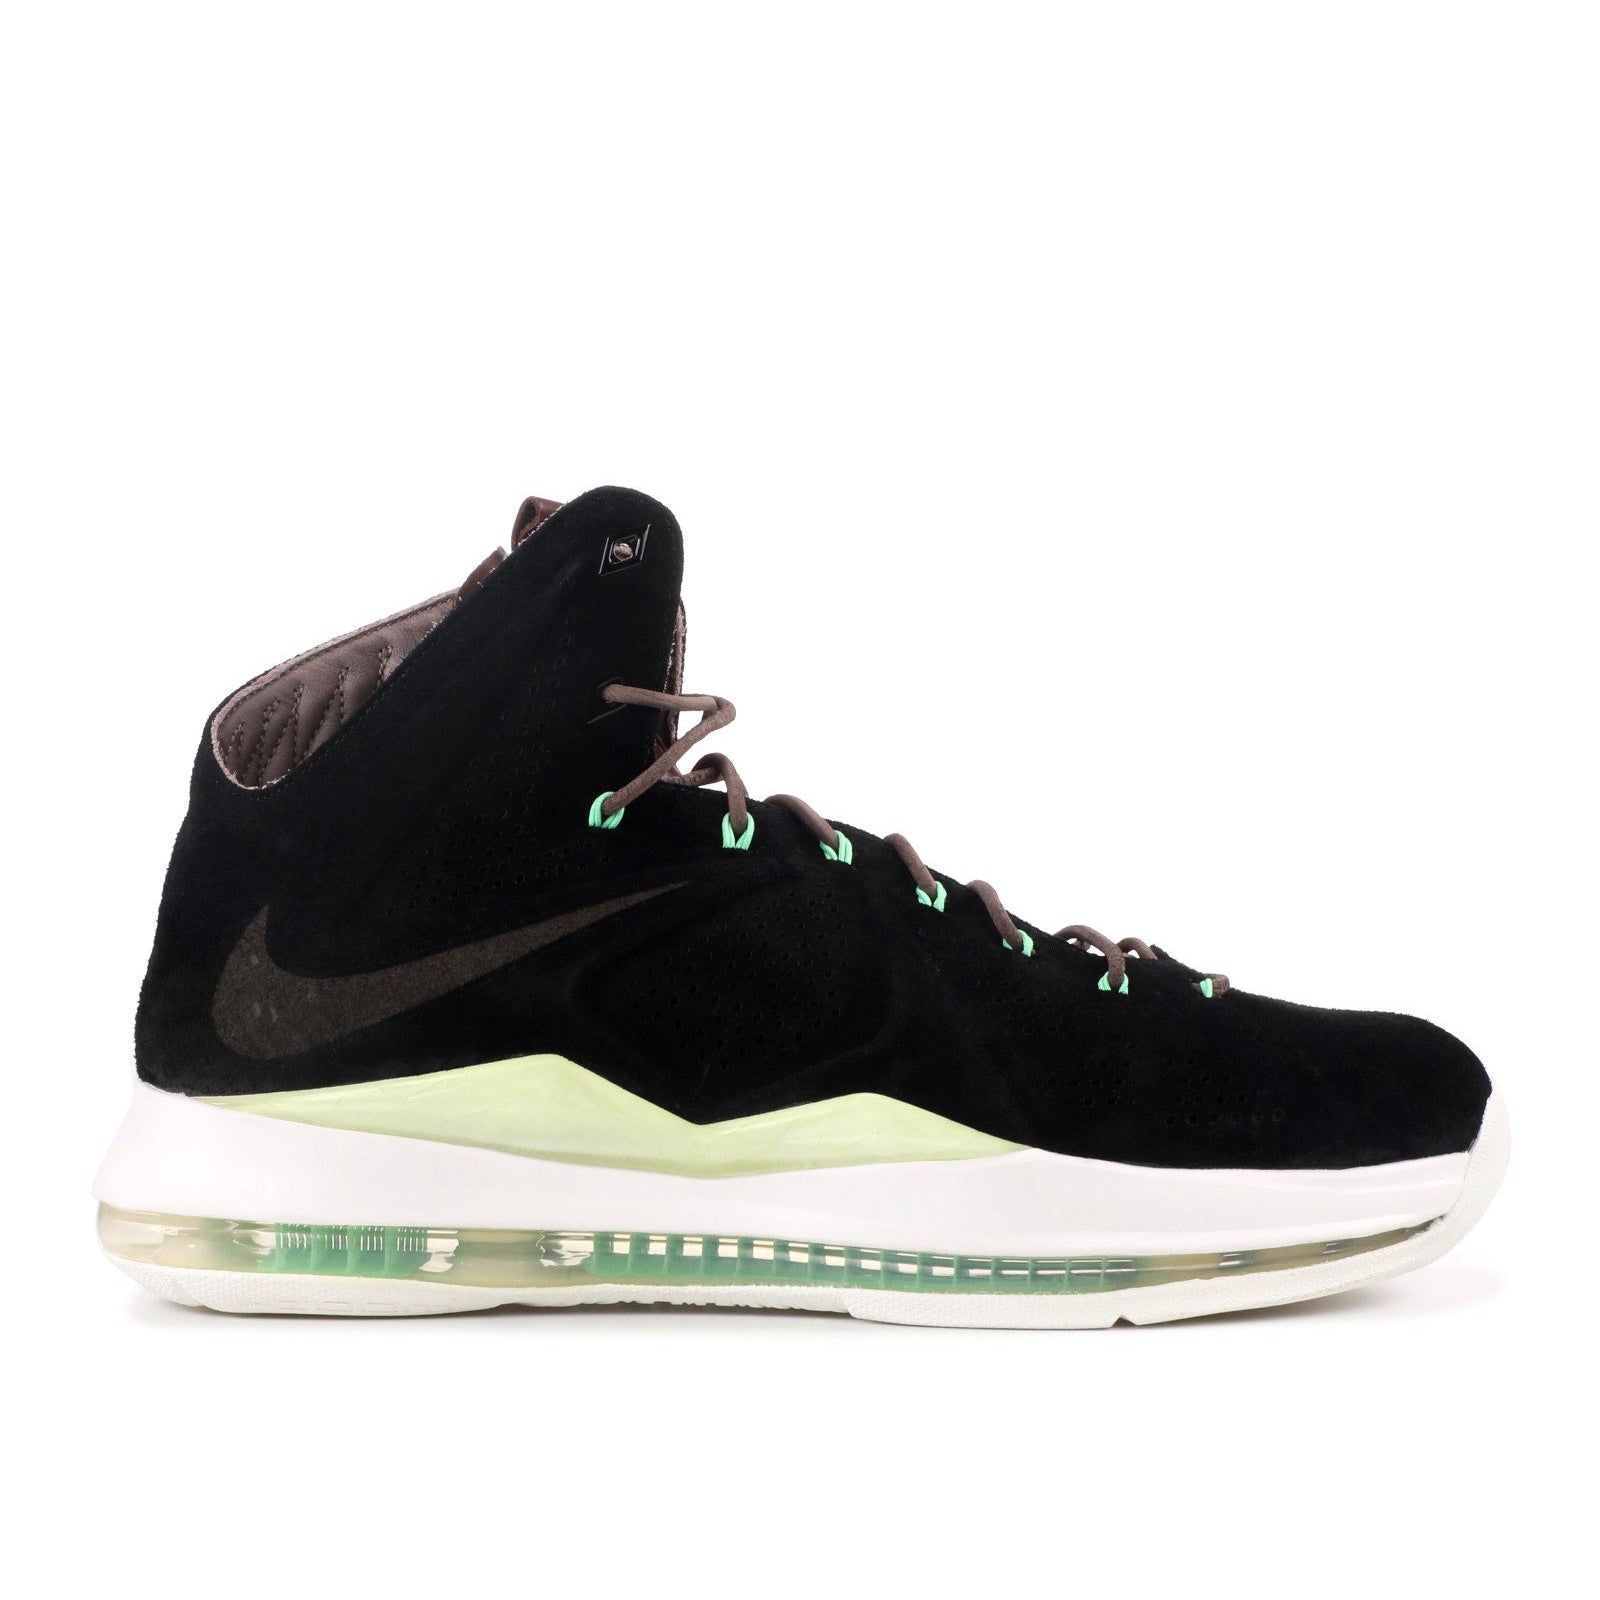 Lebron 10 Black Suede - Centrall Online